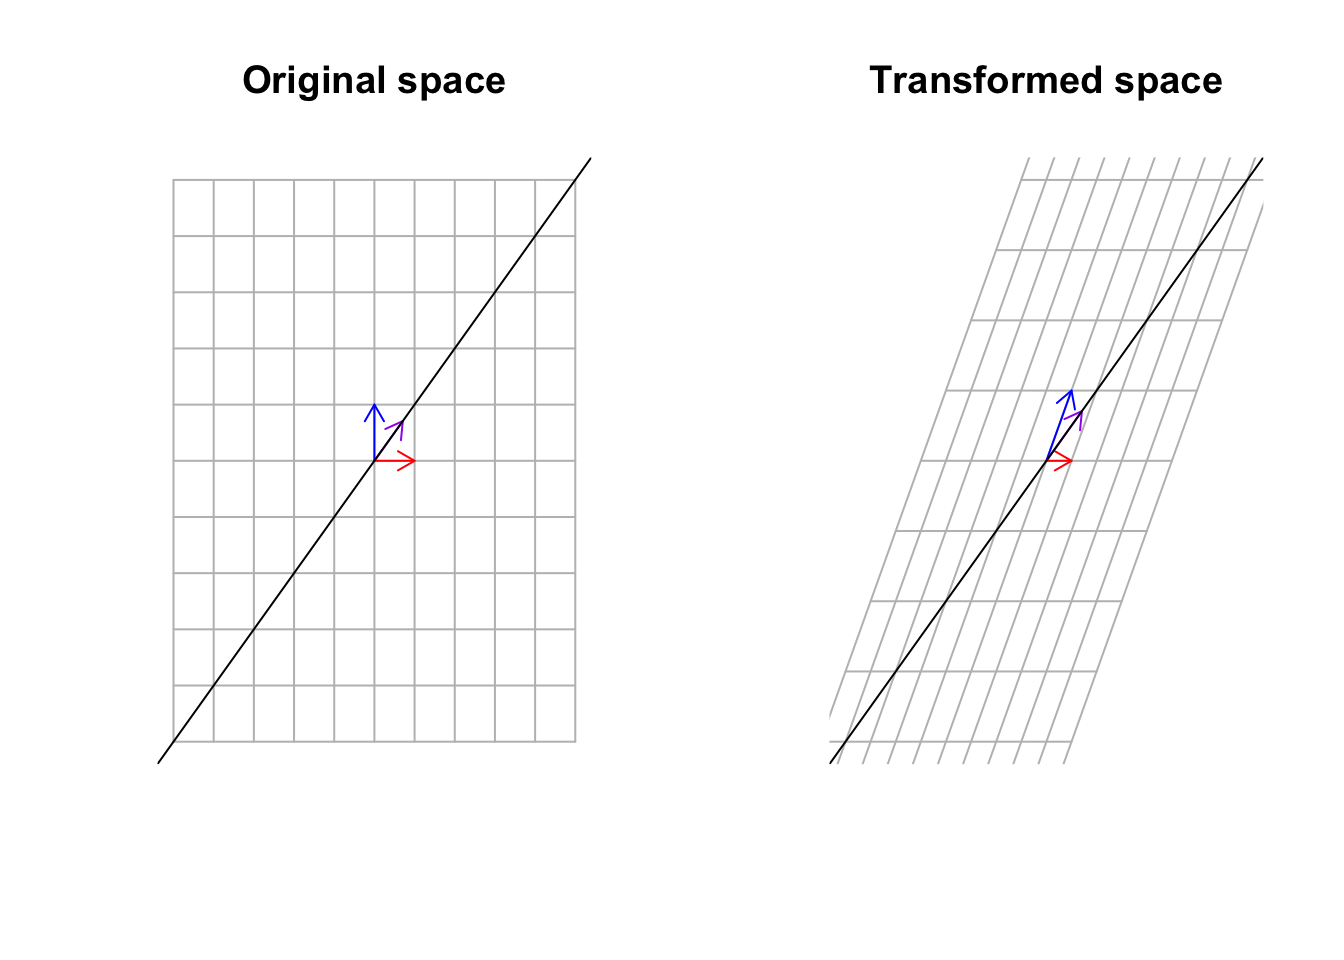 Multiply a matrix to space, including the basis vectors and span of eigen vectors